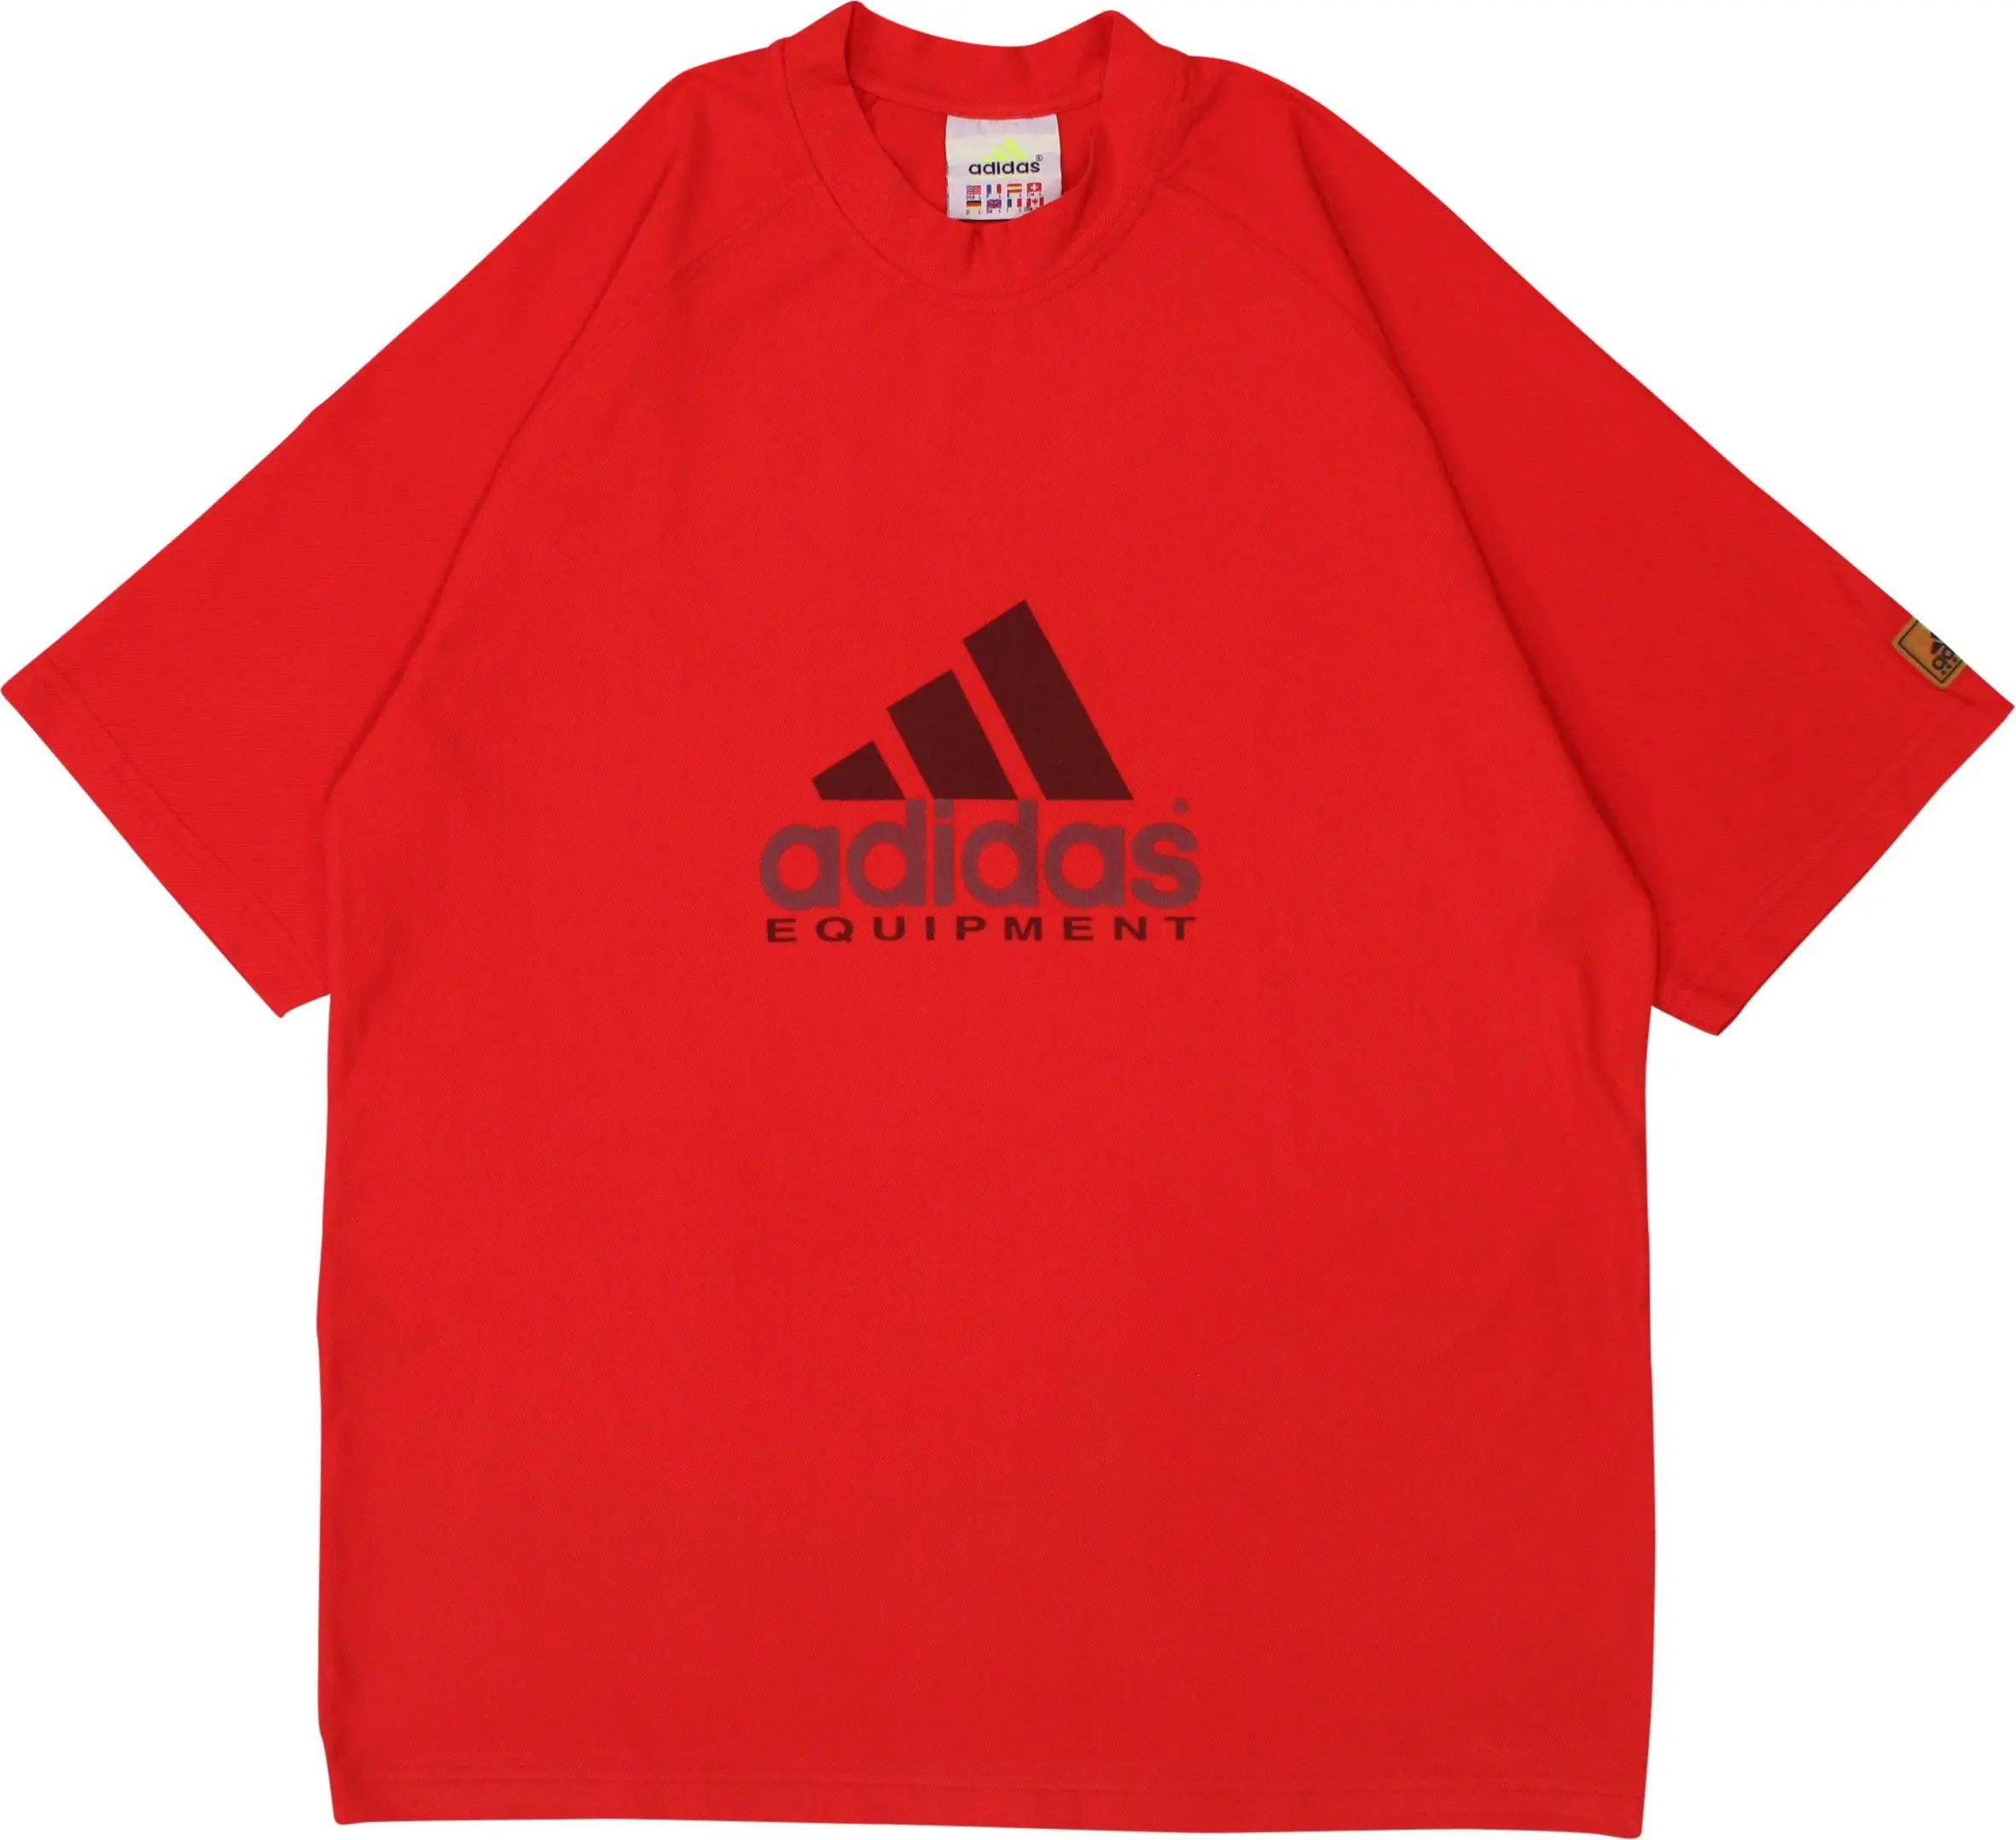 Adidas - Red Oversized Adidas Equipment T-shirt- ThriftTale.com - Vintage and second handclothing